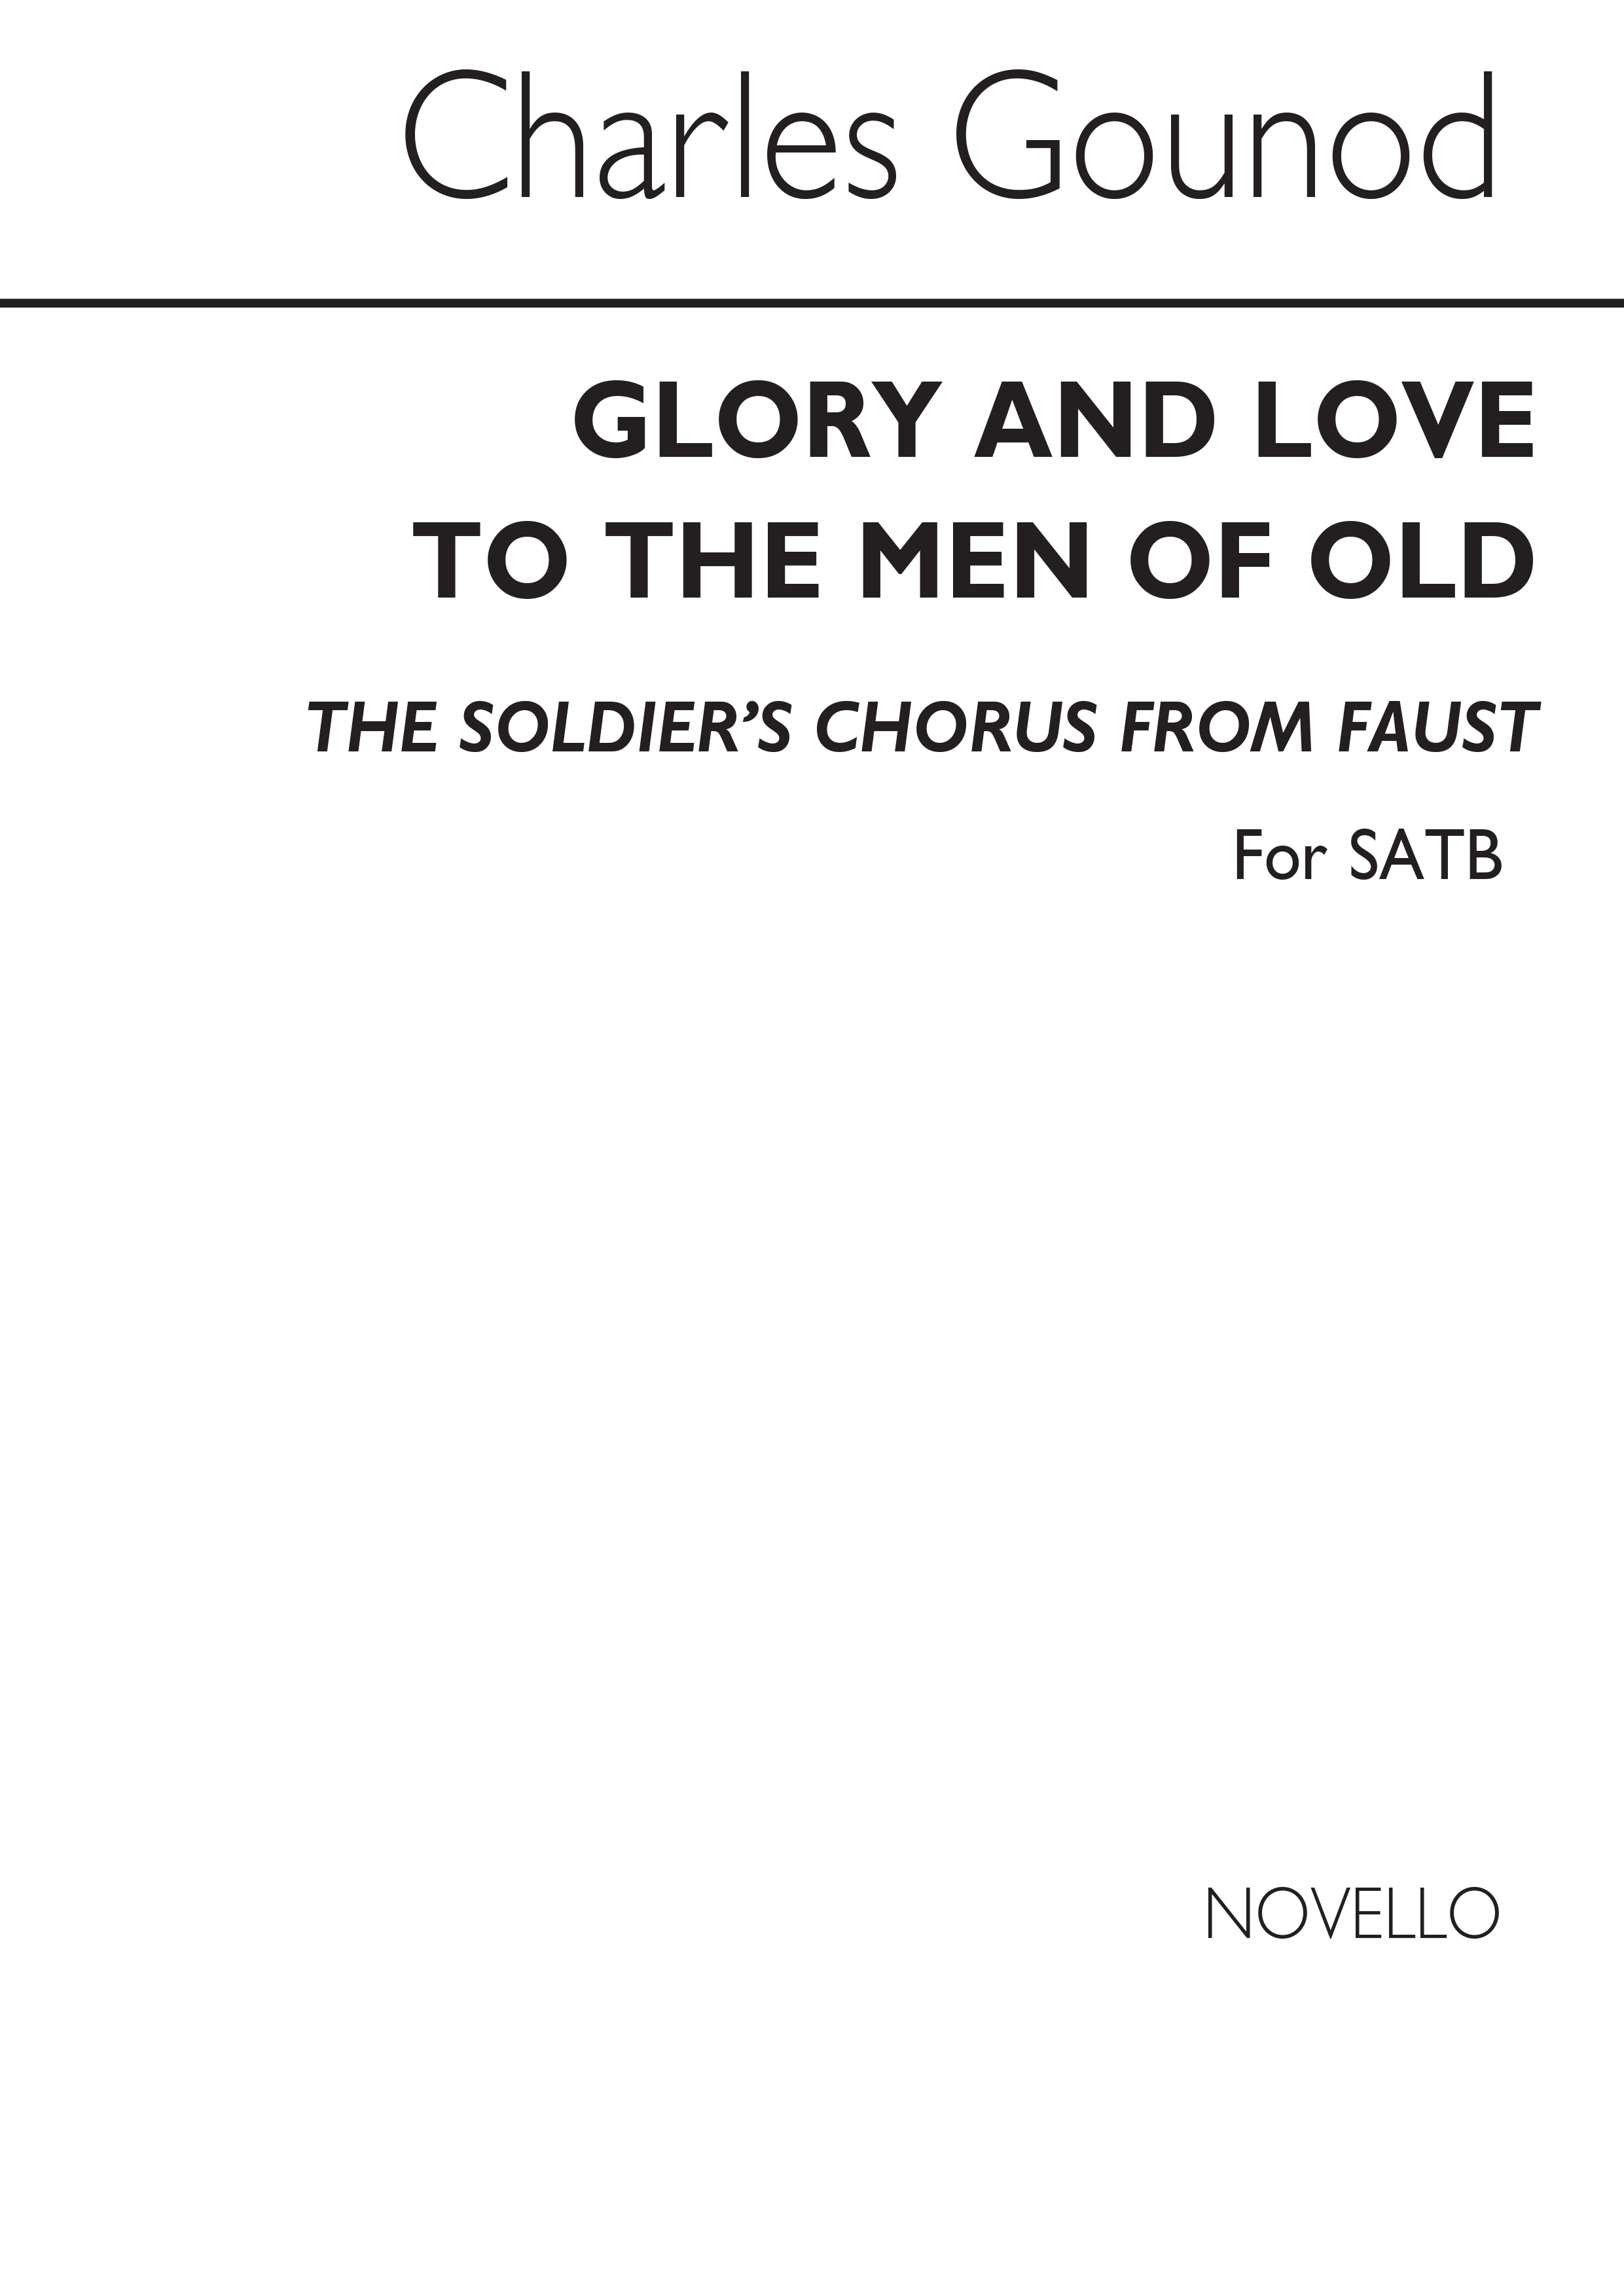 Charles Gounod: Soldiers' Chorus From Faust SATB: SATB: Vocal Score